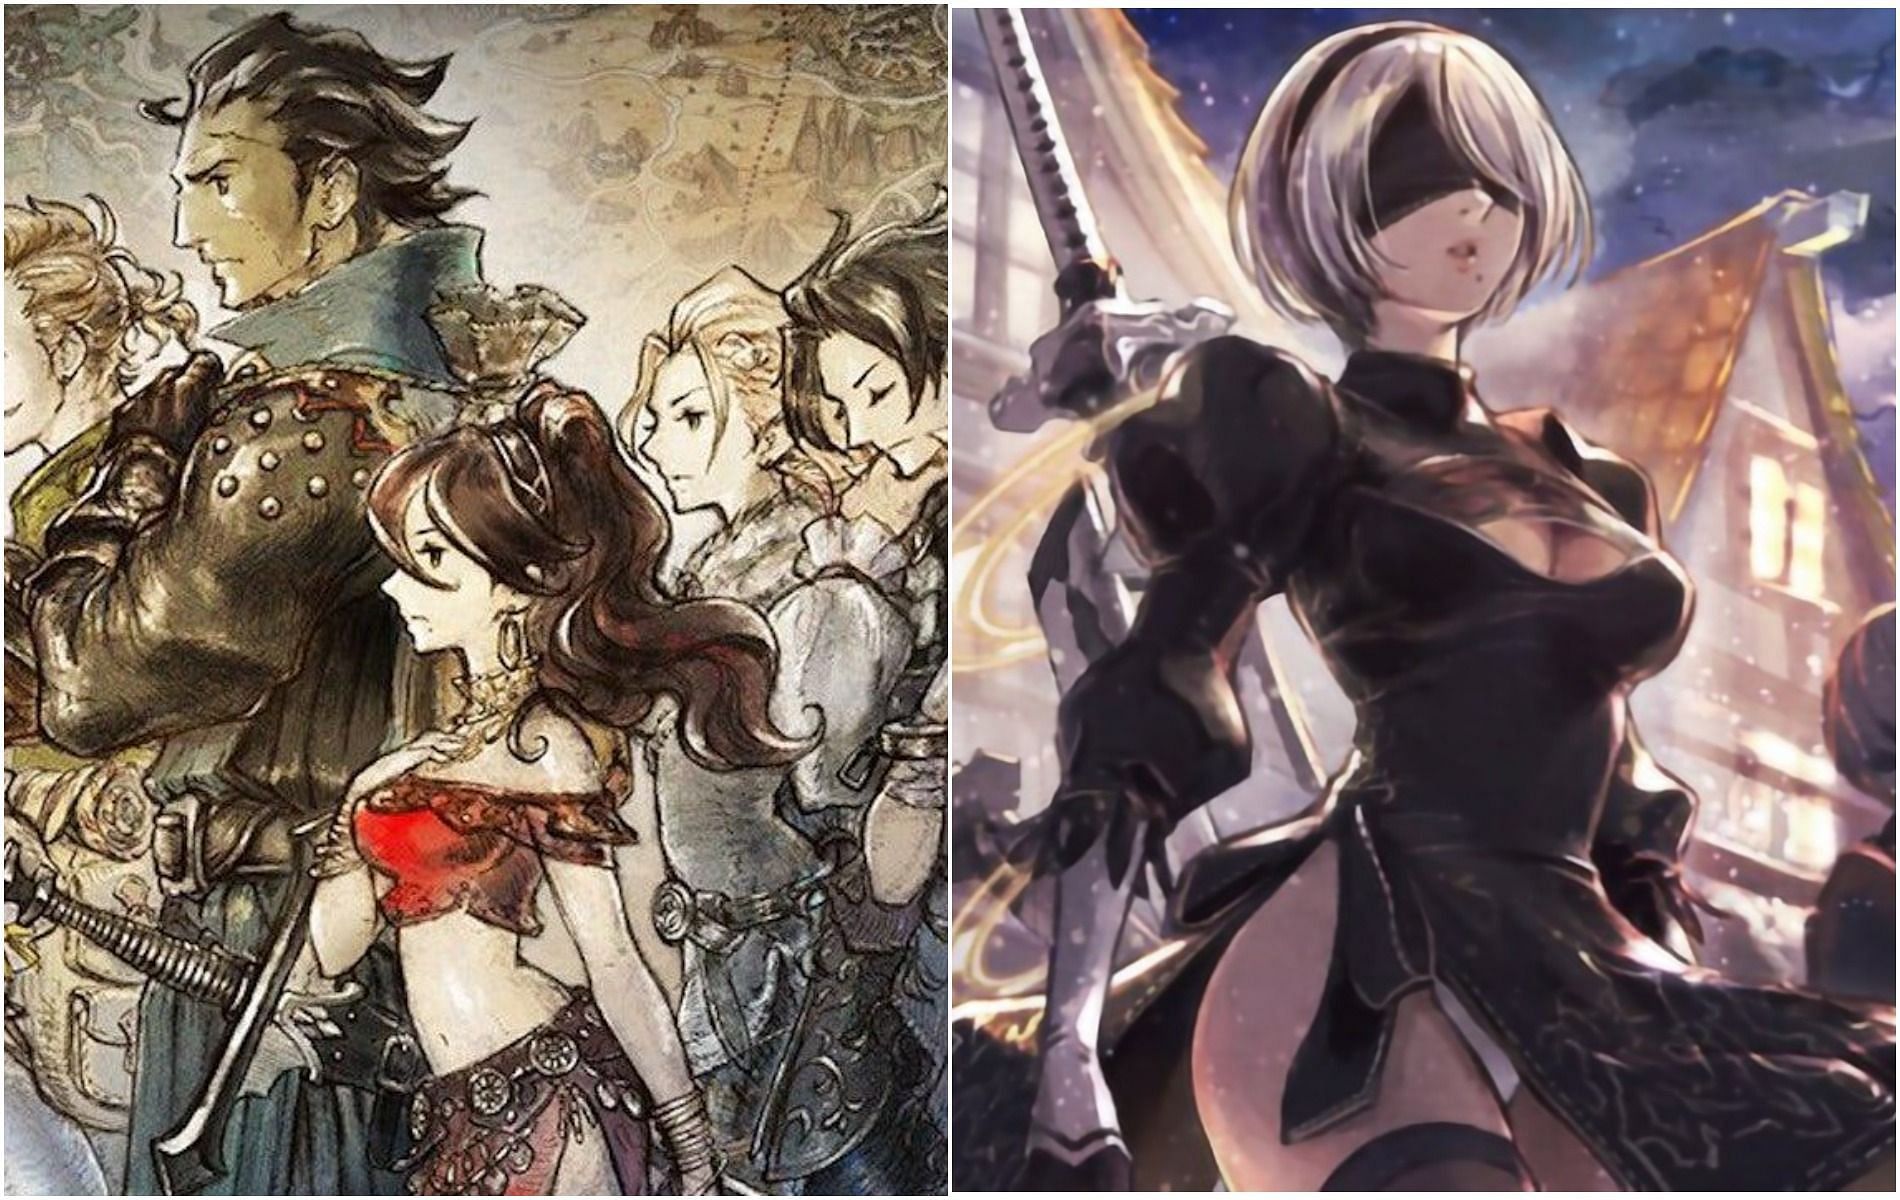 NieR: Automata is coming to Octopath Traveler&#039;s mobile game starting today (Image via Square-Enix)